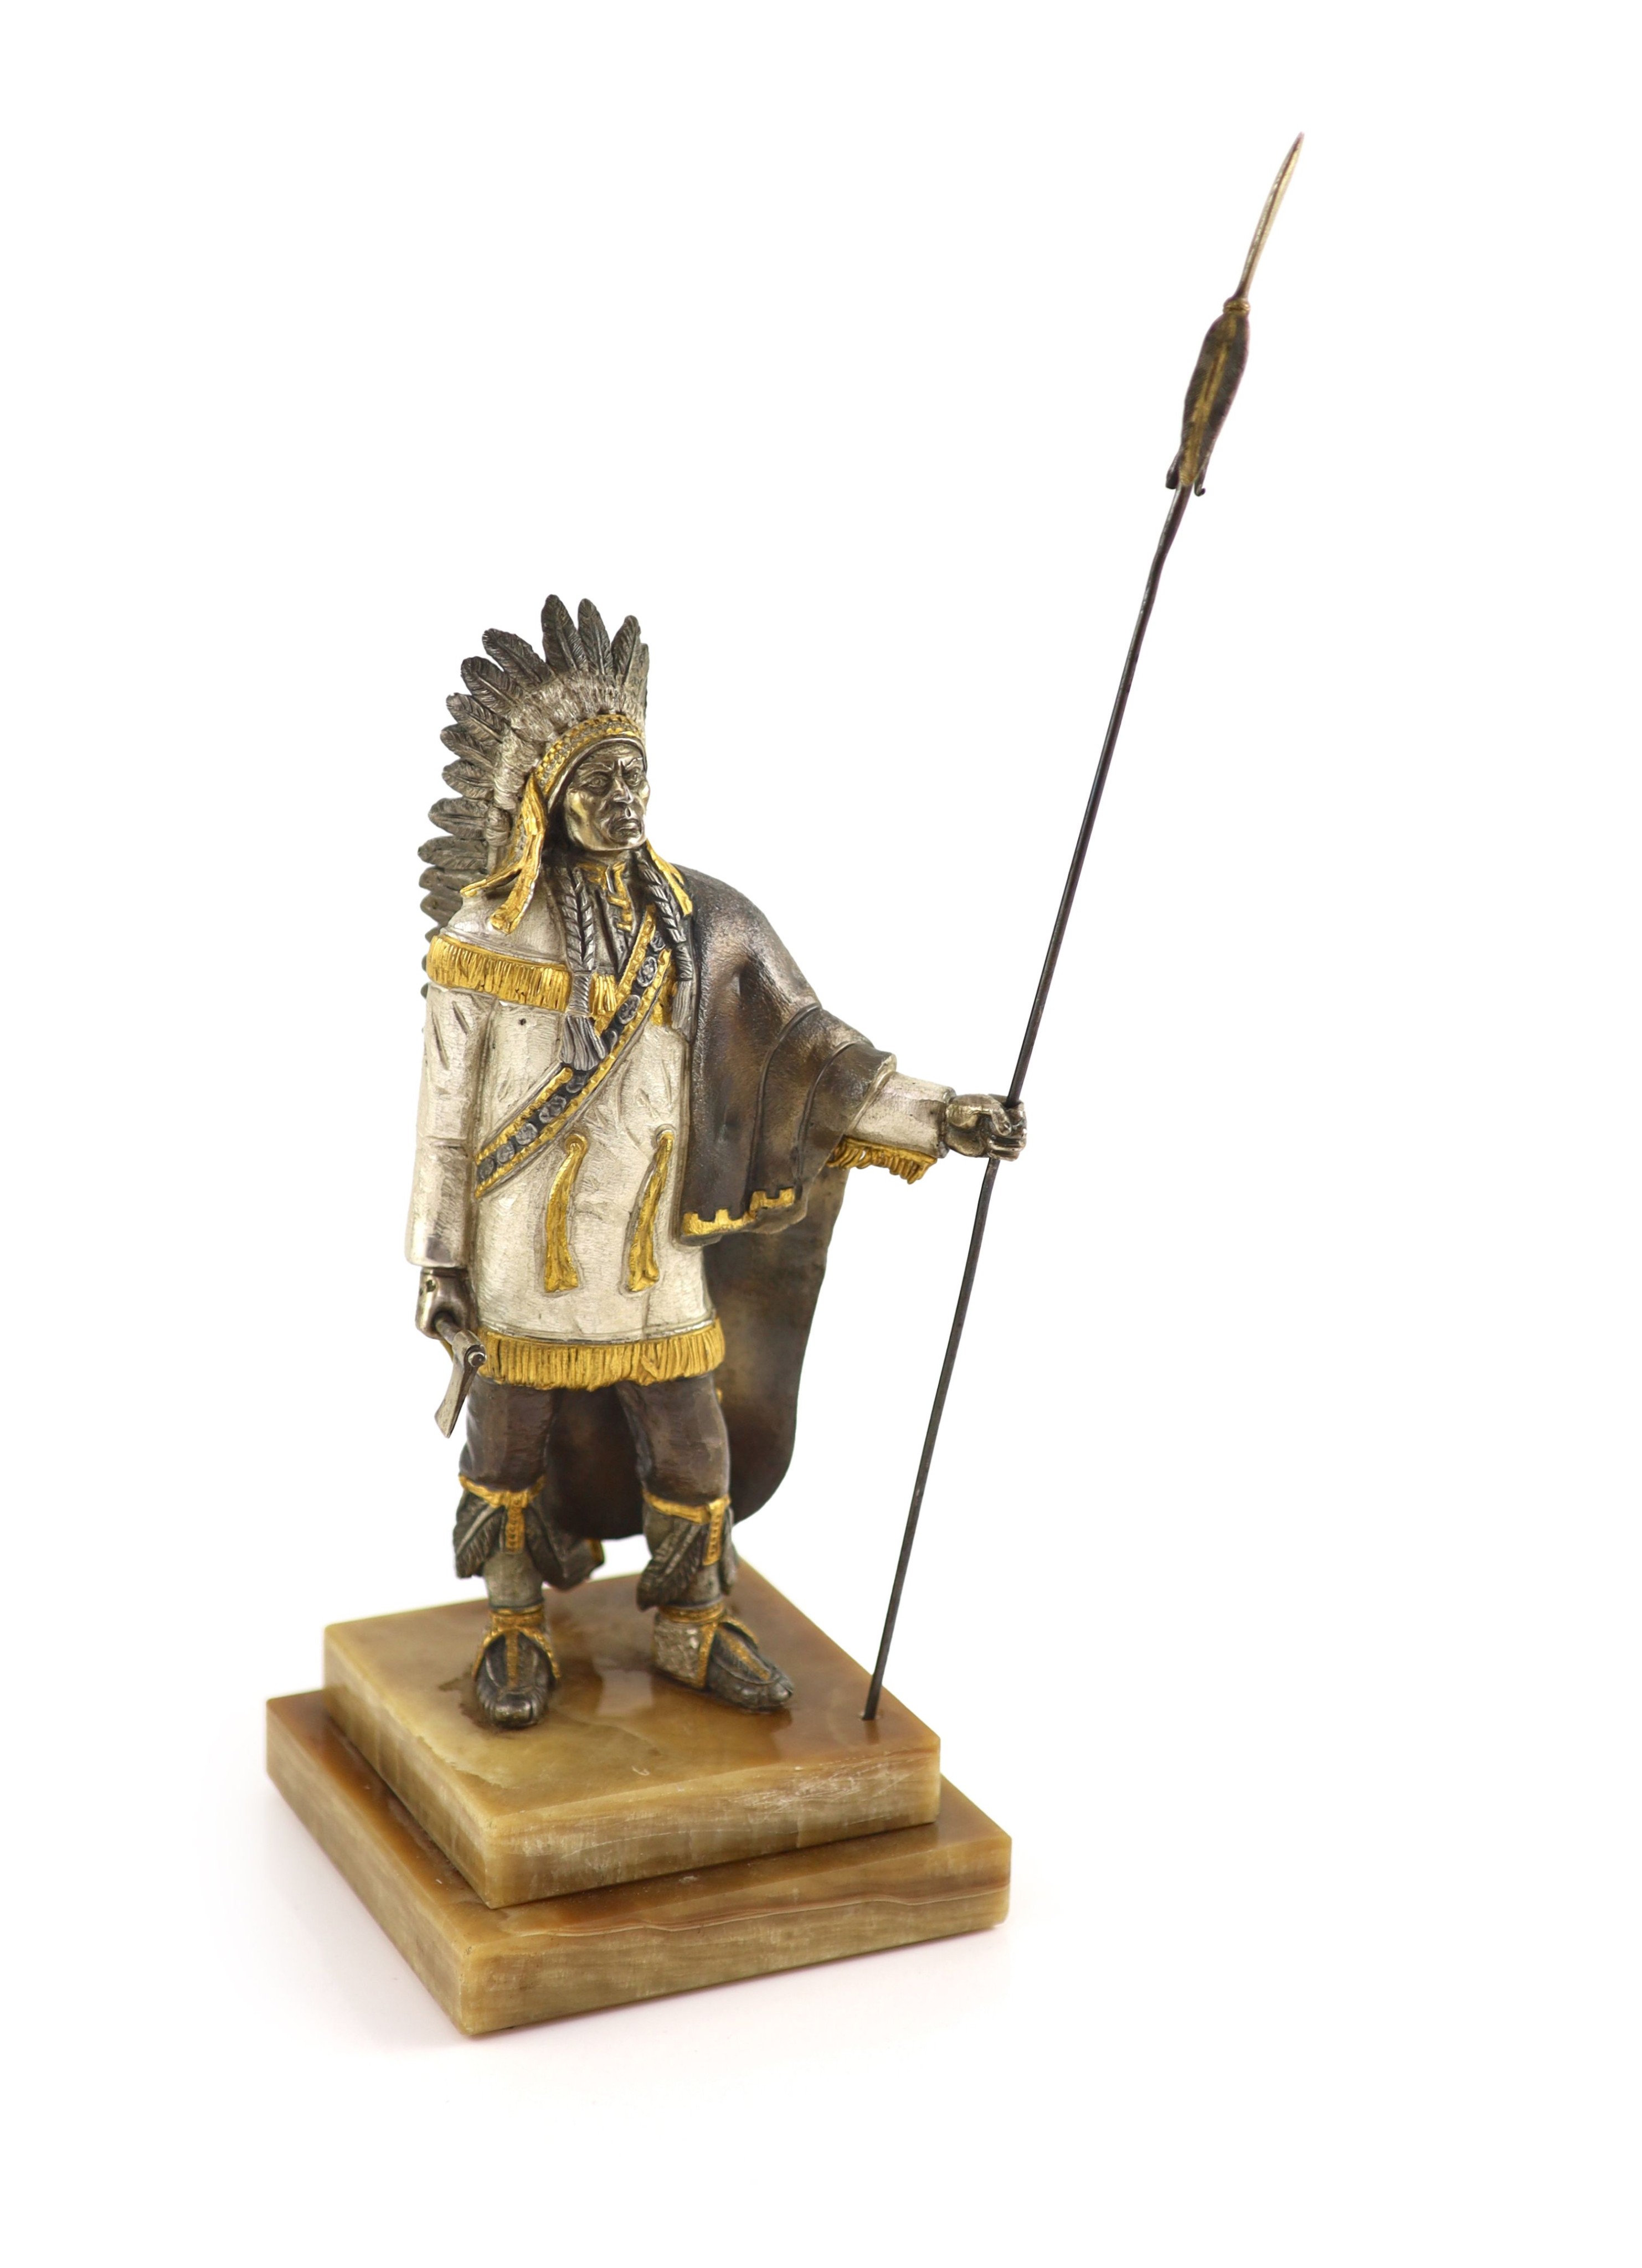 After Carl Kauba, a gilded, silvered and patinated bronze figure of a Native American chieftain, H 36 cm. (from tip of spear)                                                                                               